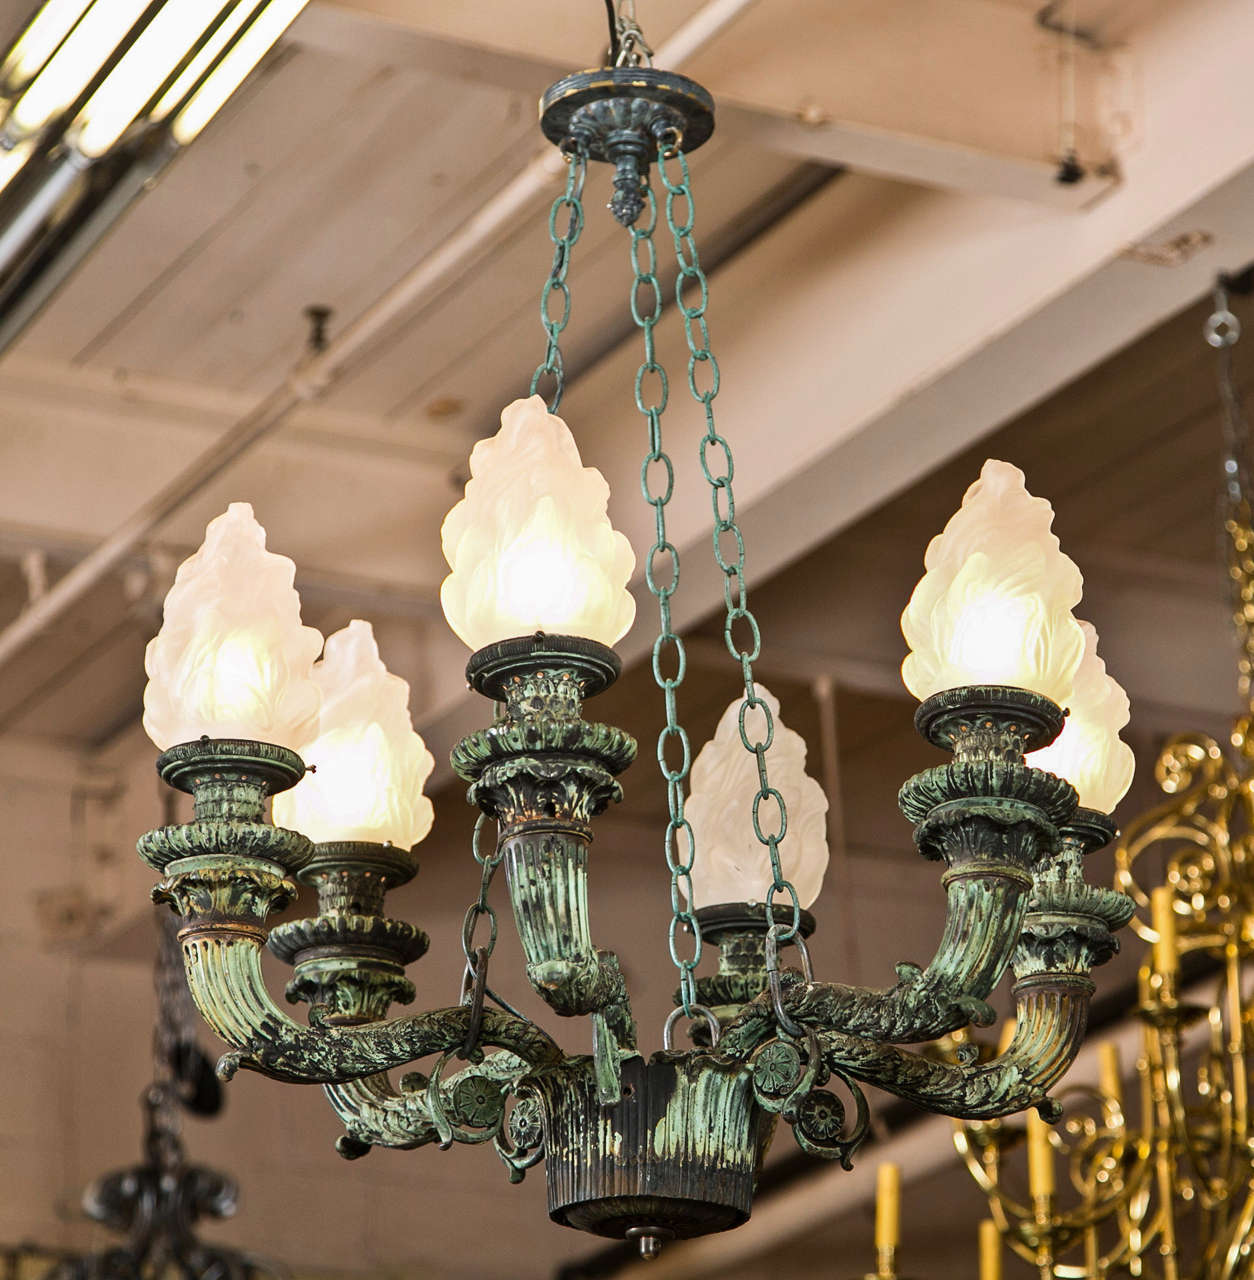 Pair of Antique Bronze Chandeliers Salvaged From Archiitectural Design 3